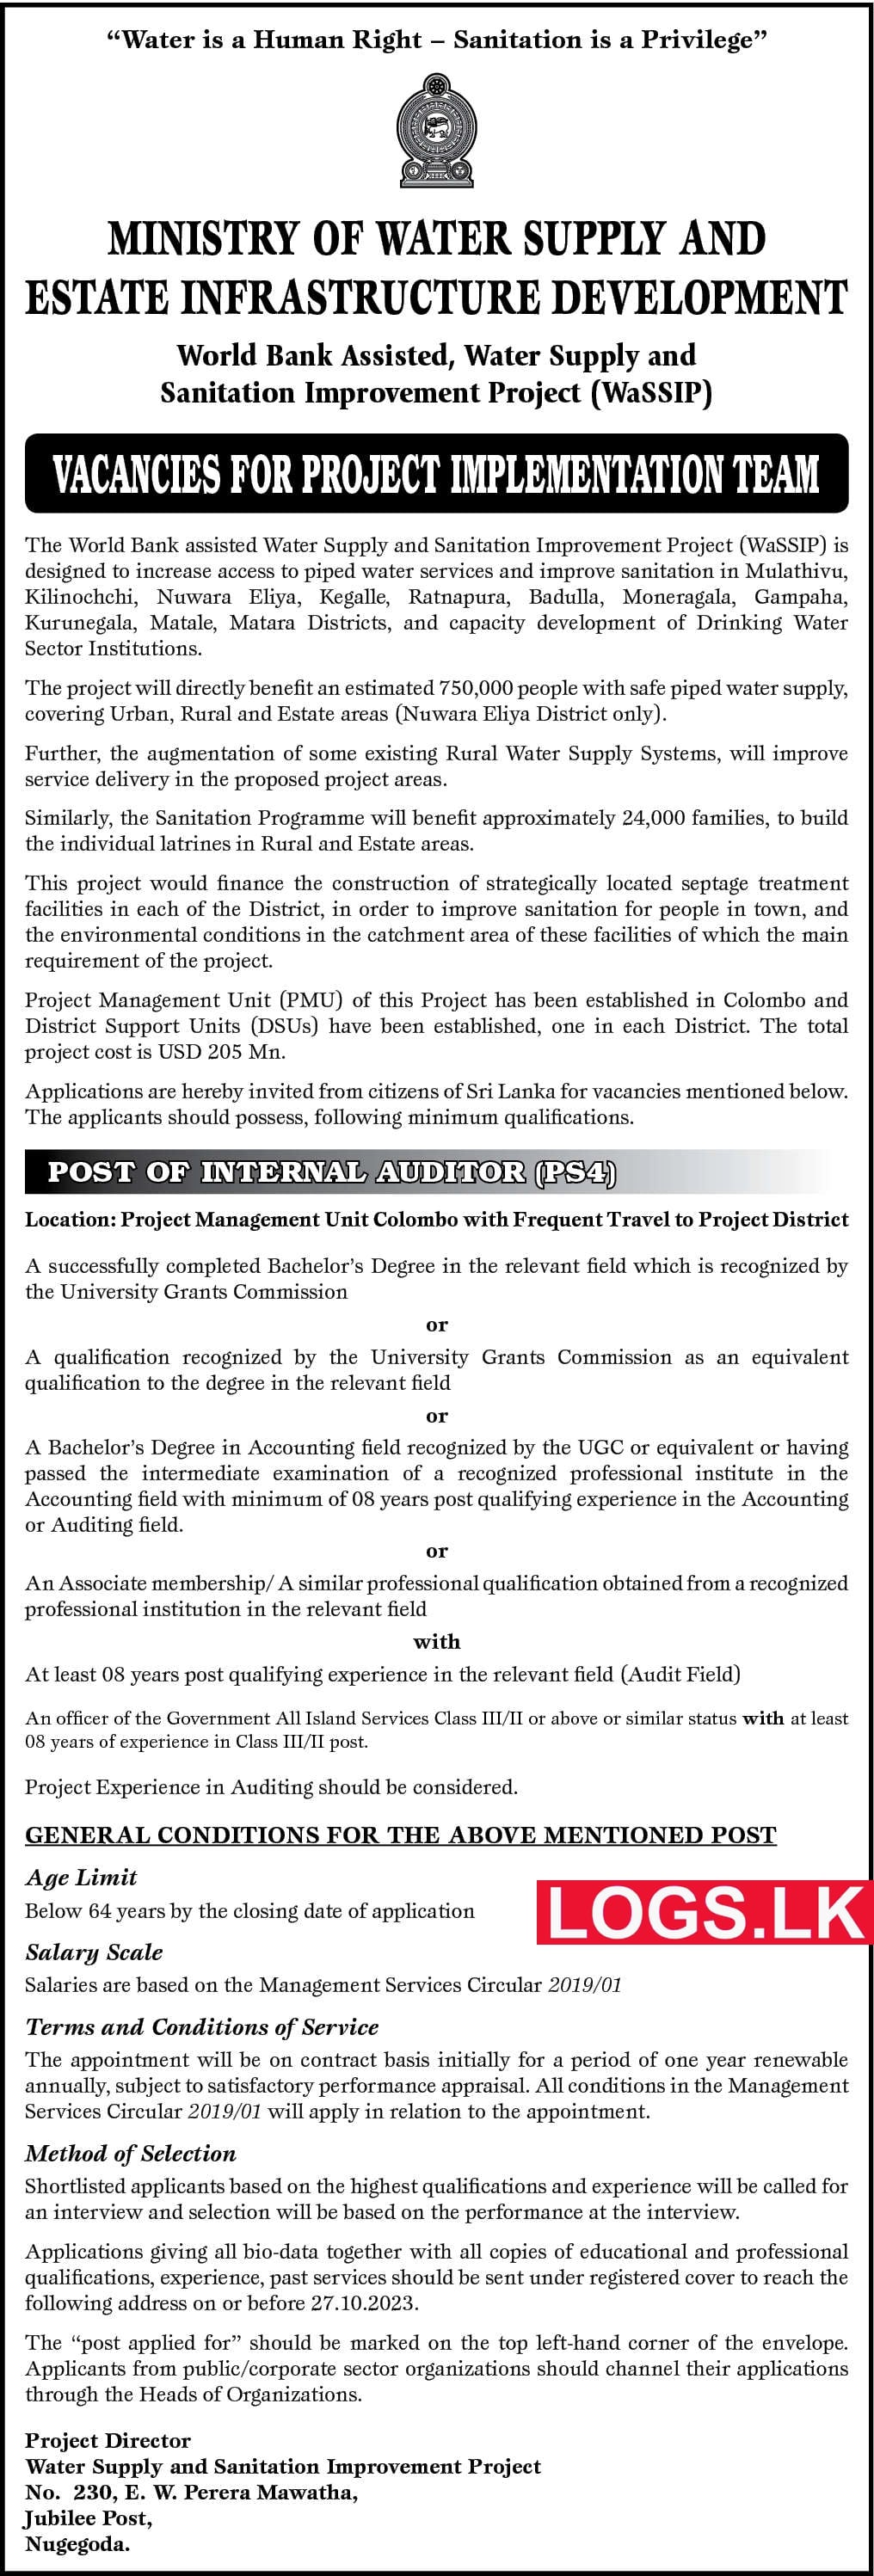 Internal Auditor - Ministry of Water Supply and Estate Infrastructure Development Job Vacancies 2024